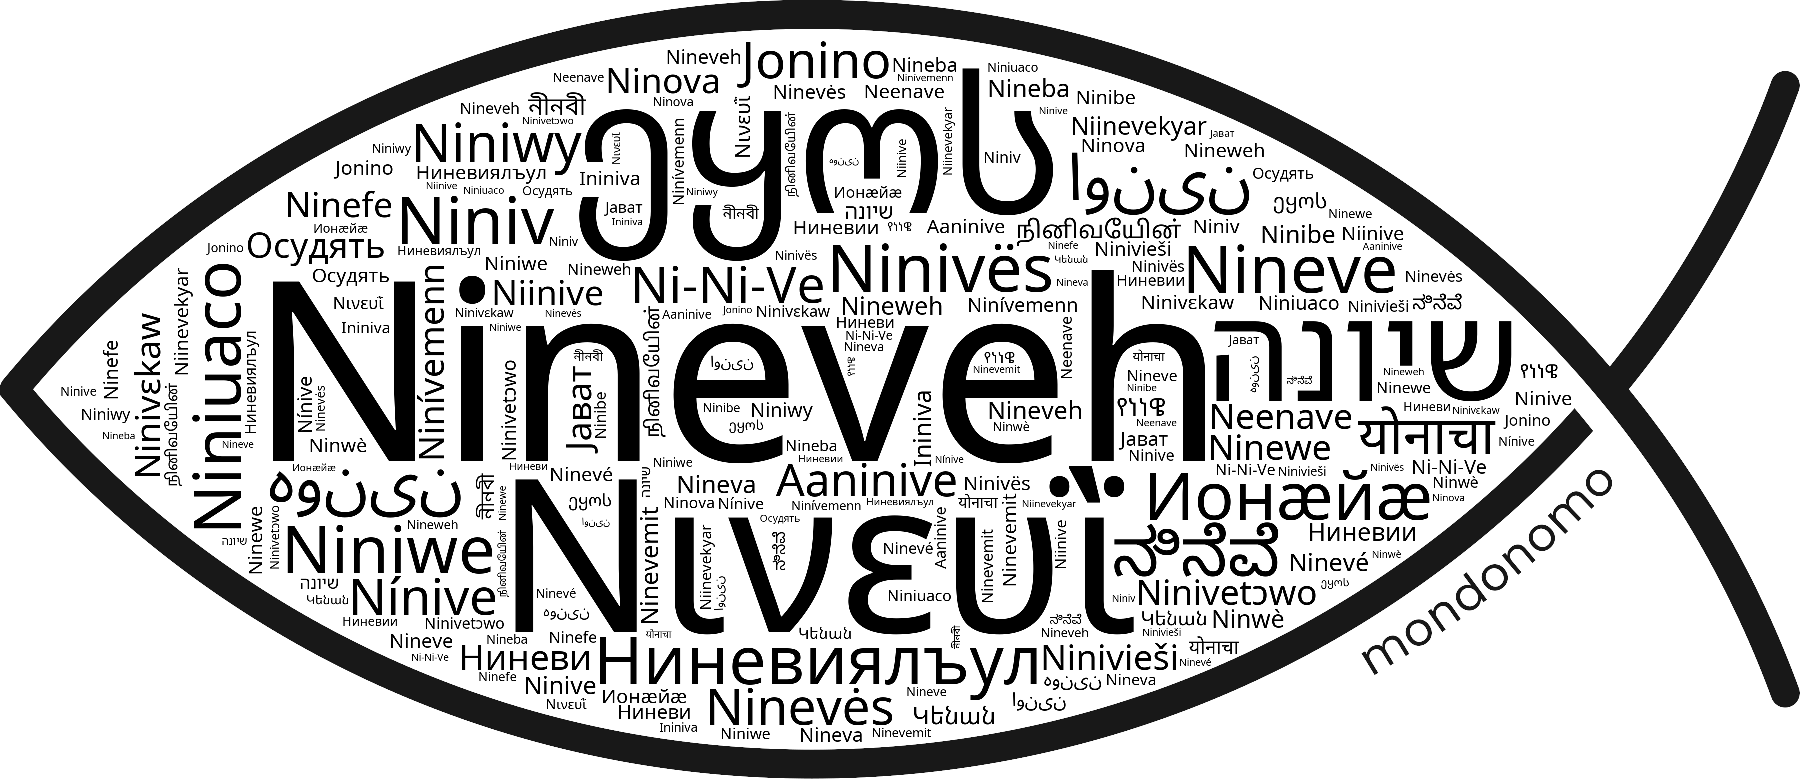 Name Nineveh in the world's Bibles